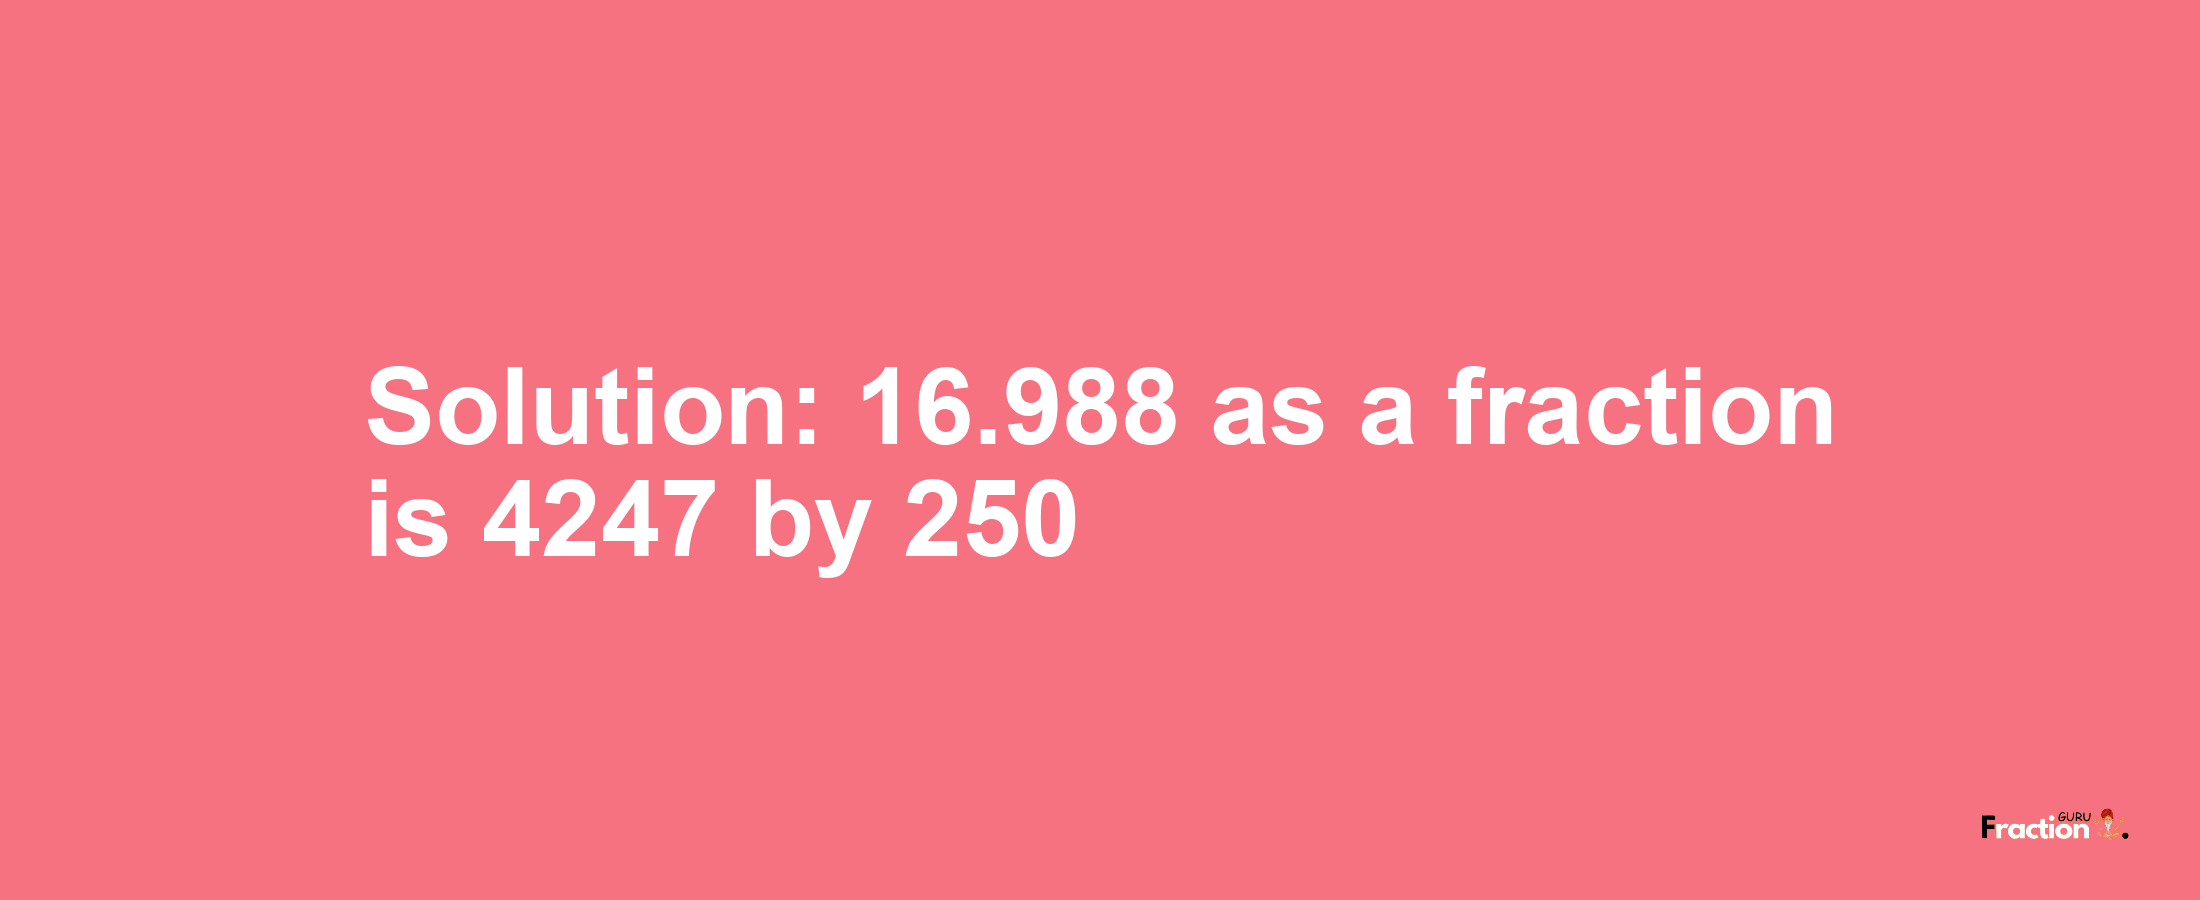 Solution:16.988 as a fraction is 4247/250